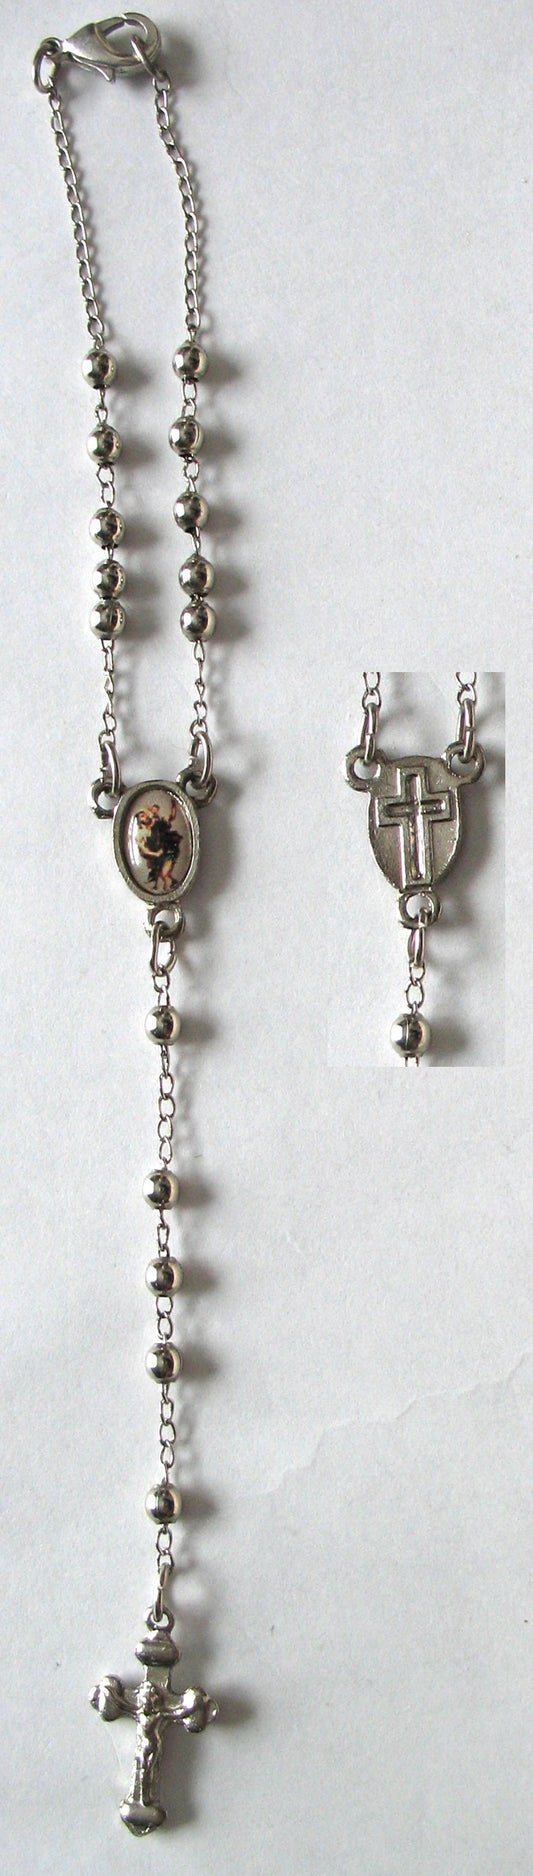 Car Rosary - Chain with St. Christopher Center and Tiny Metal Beads